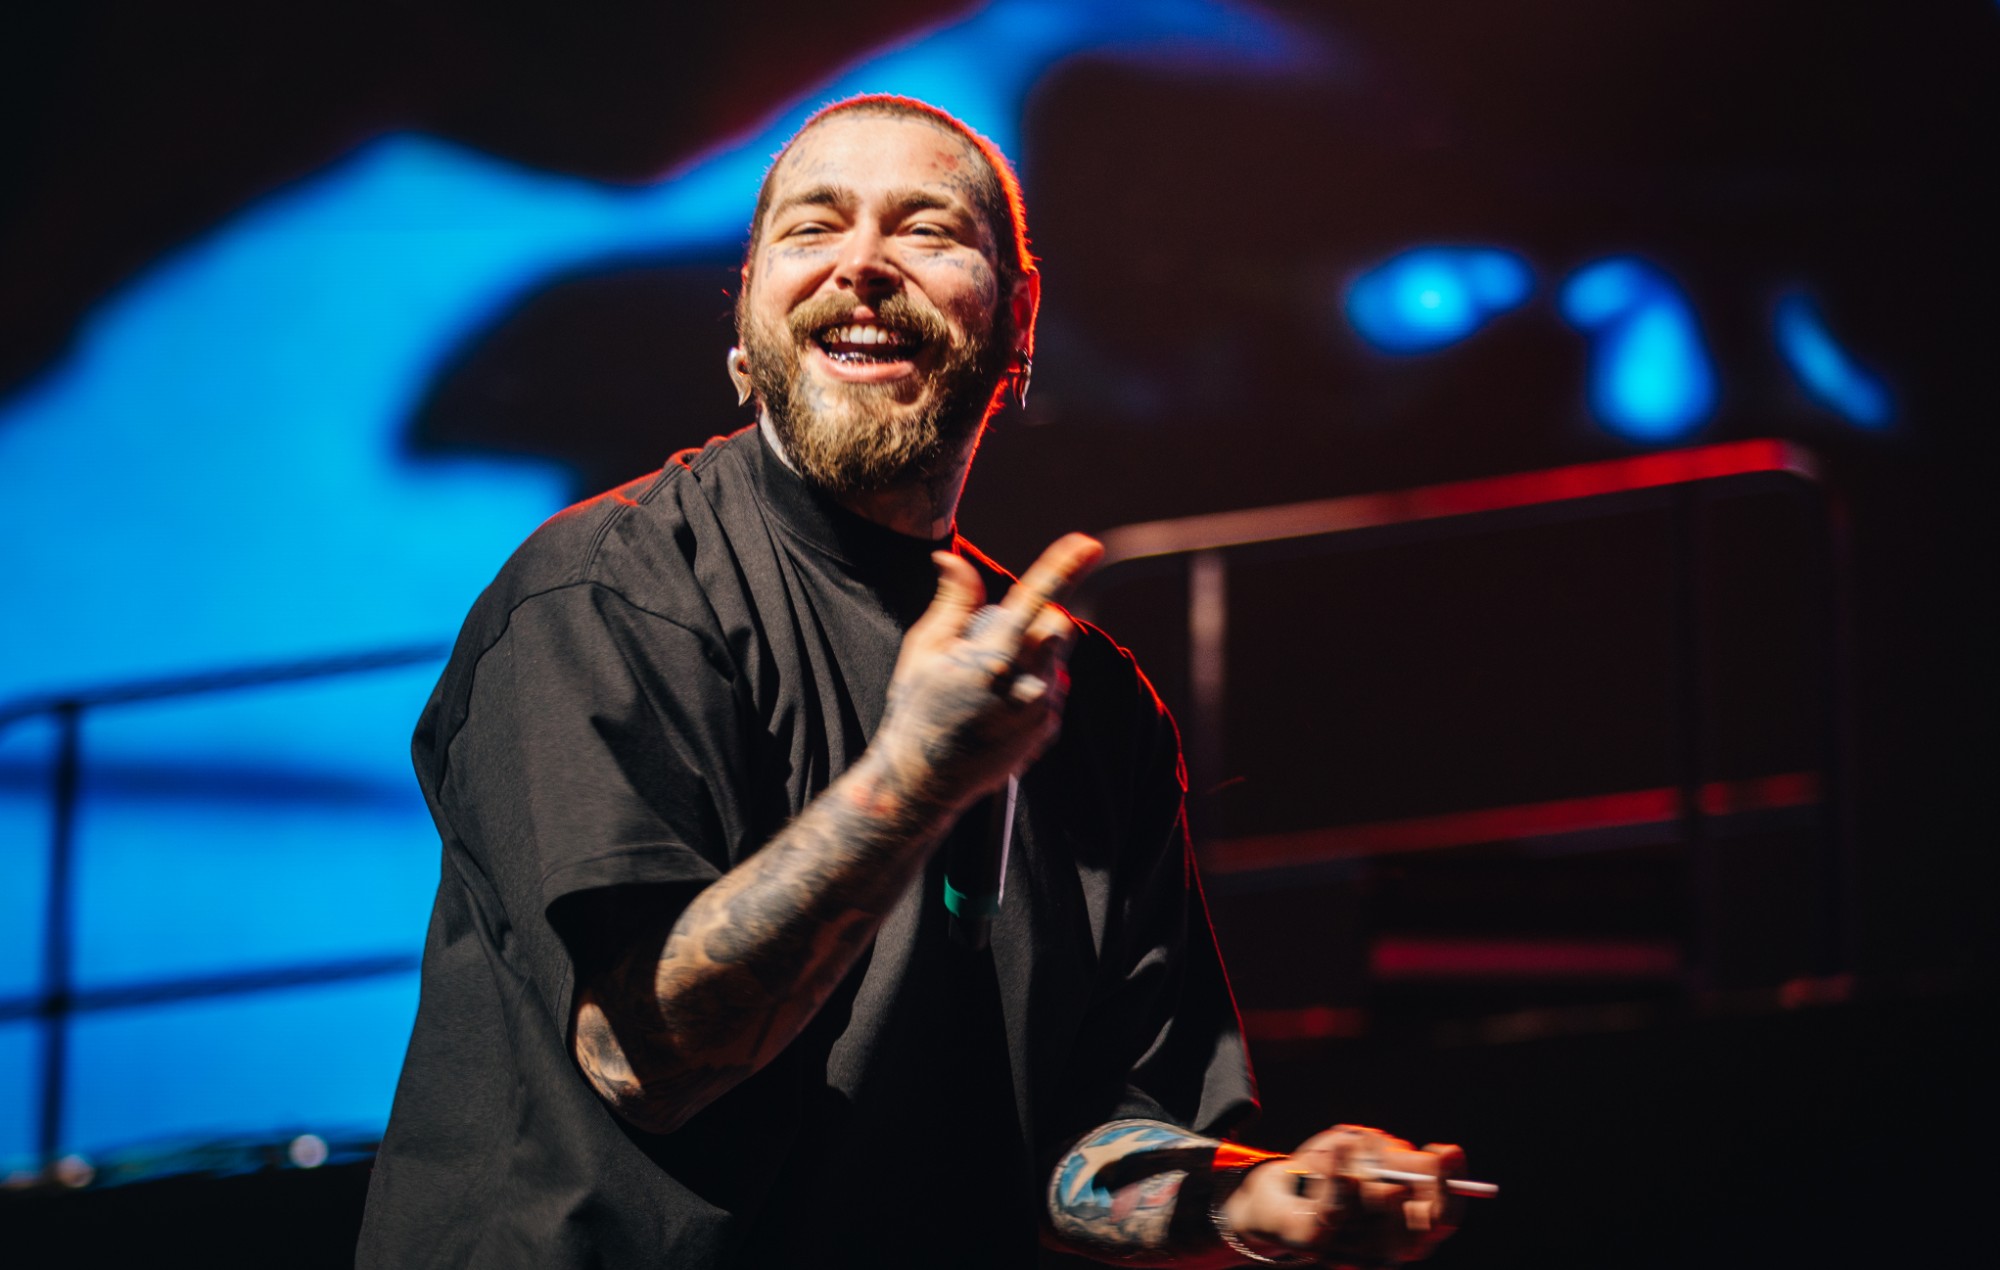 Post Malone hotboxes a stranger’s car for ‘Impractical Jokers’ prank